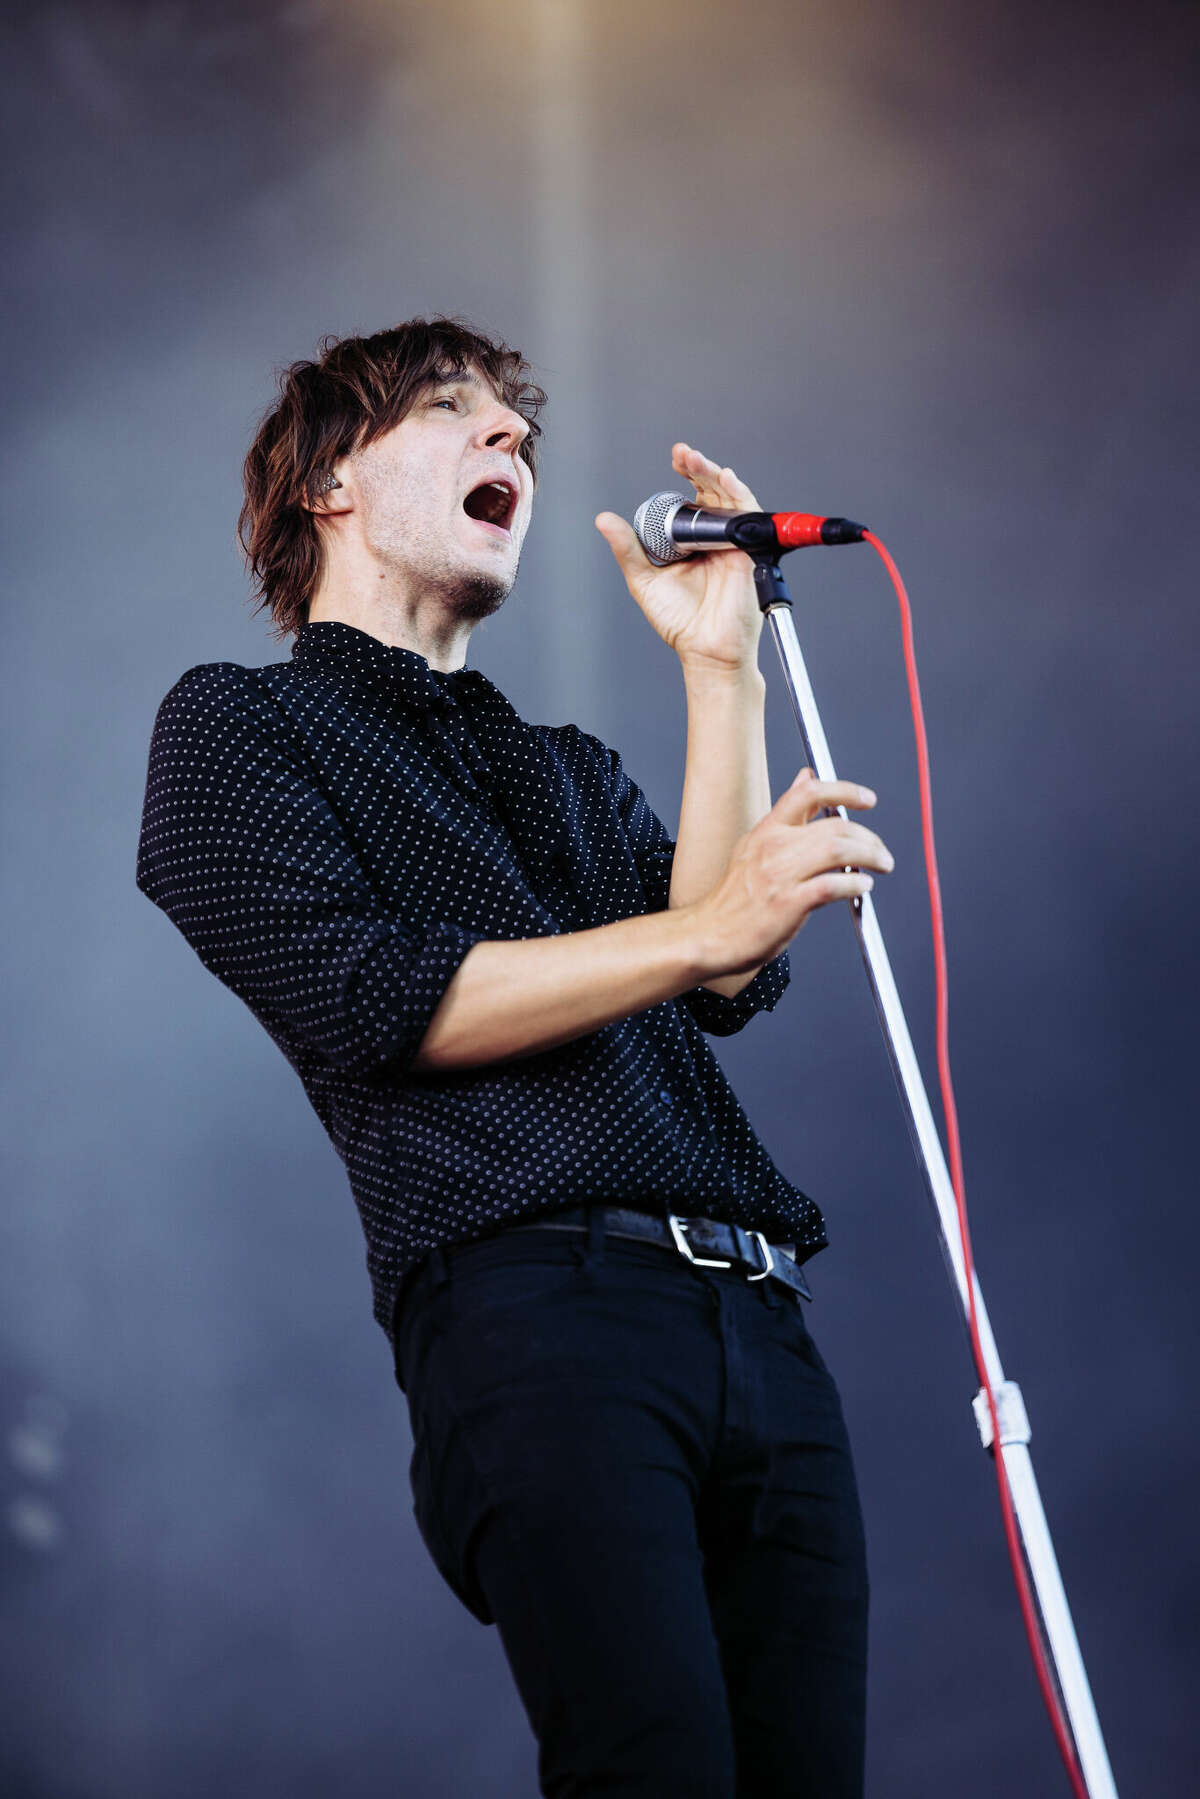 Phoenix performing on the Honda stage during weekend two of the Austin City Limits Music Festival on Friday, October 14.